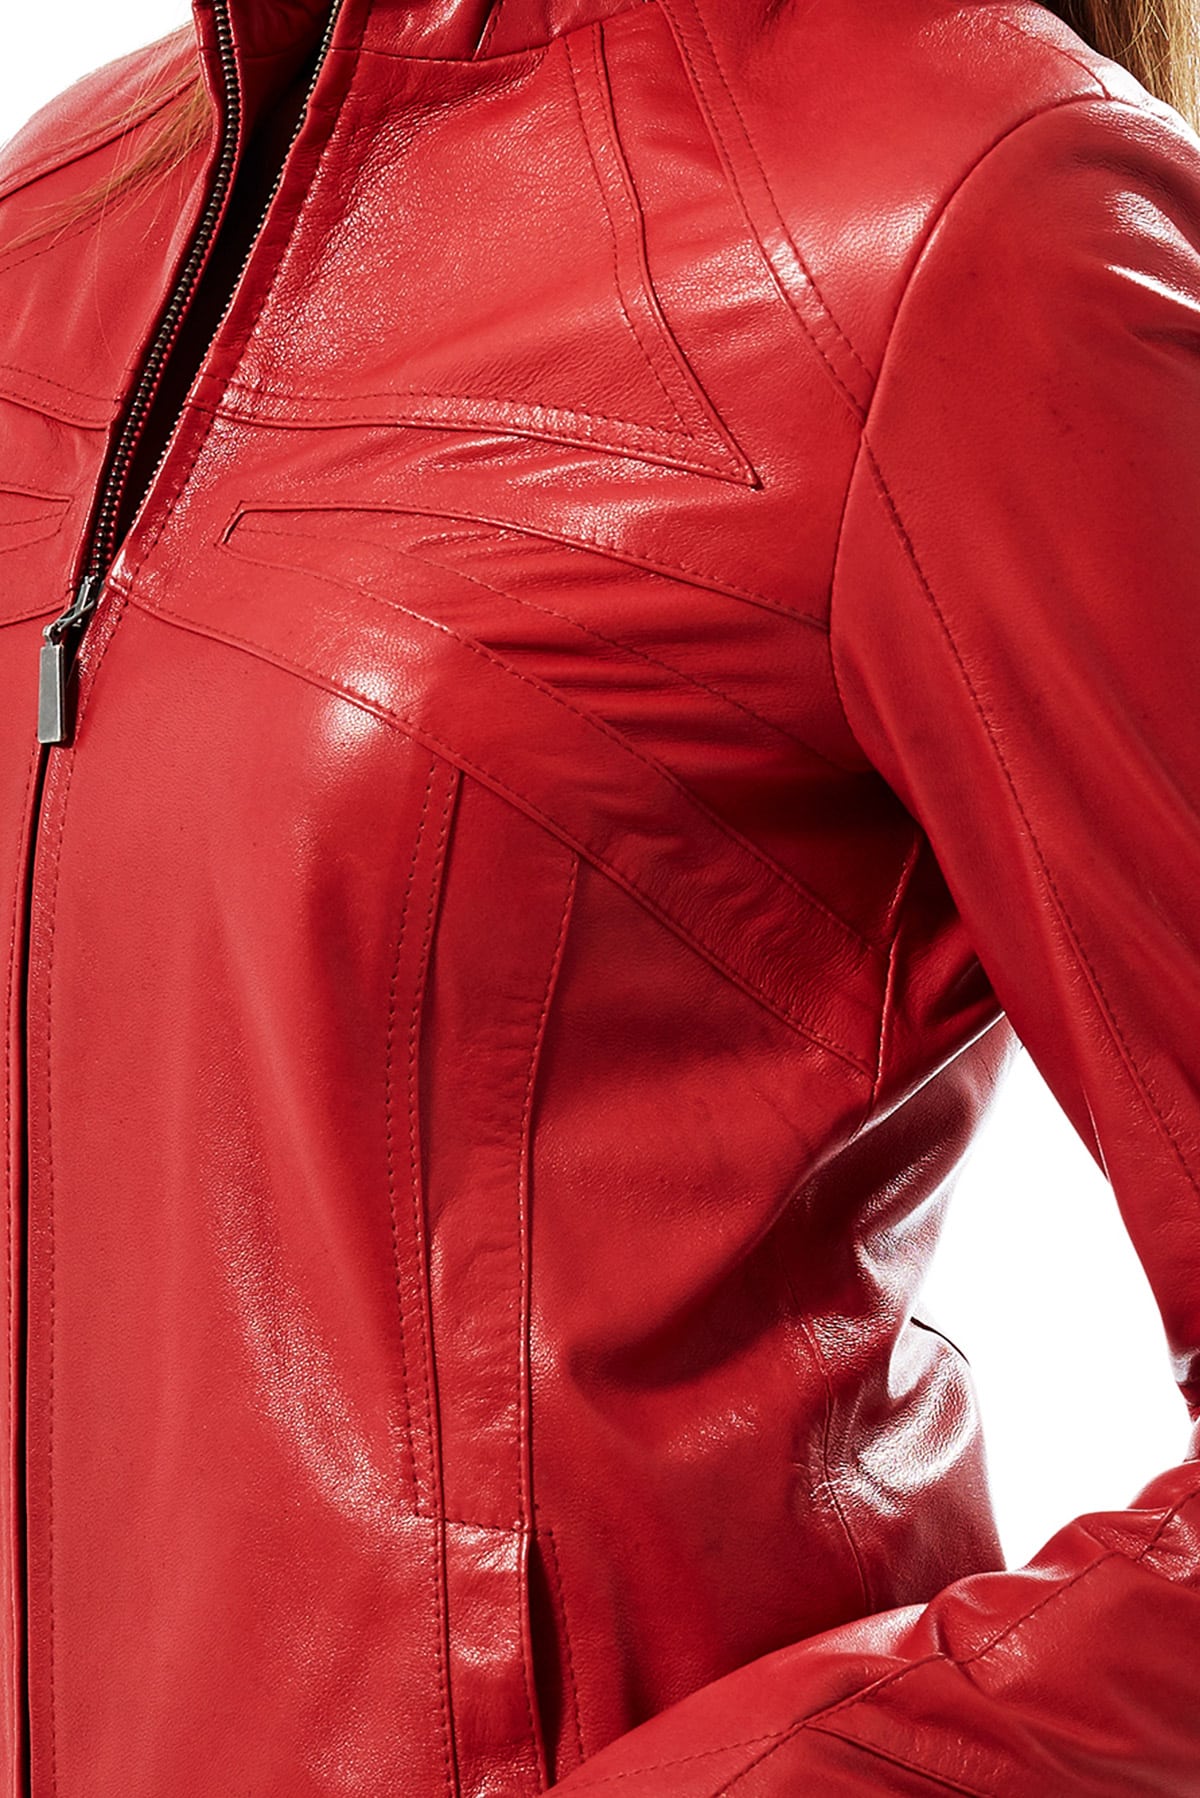 real leather jackets for women